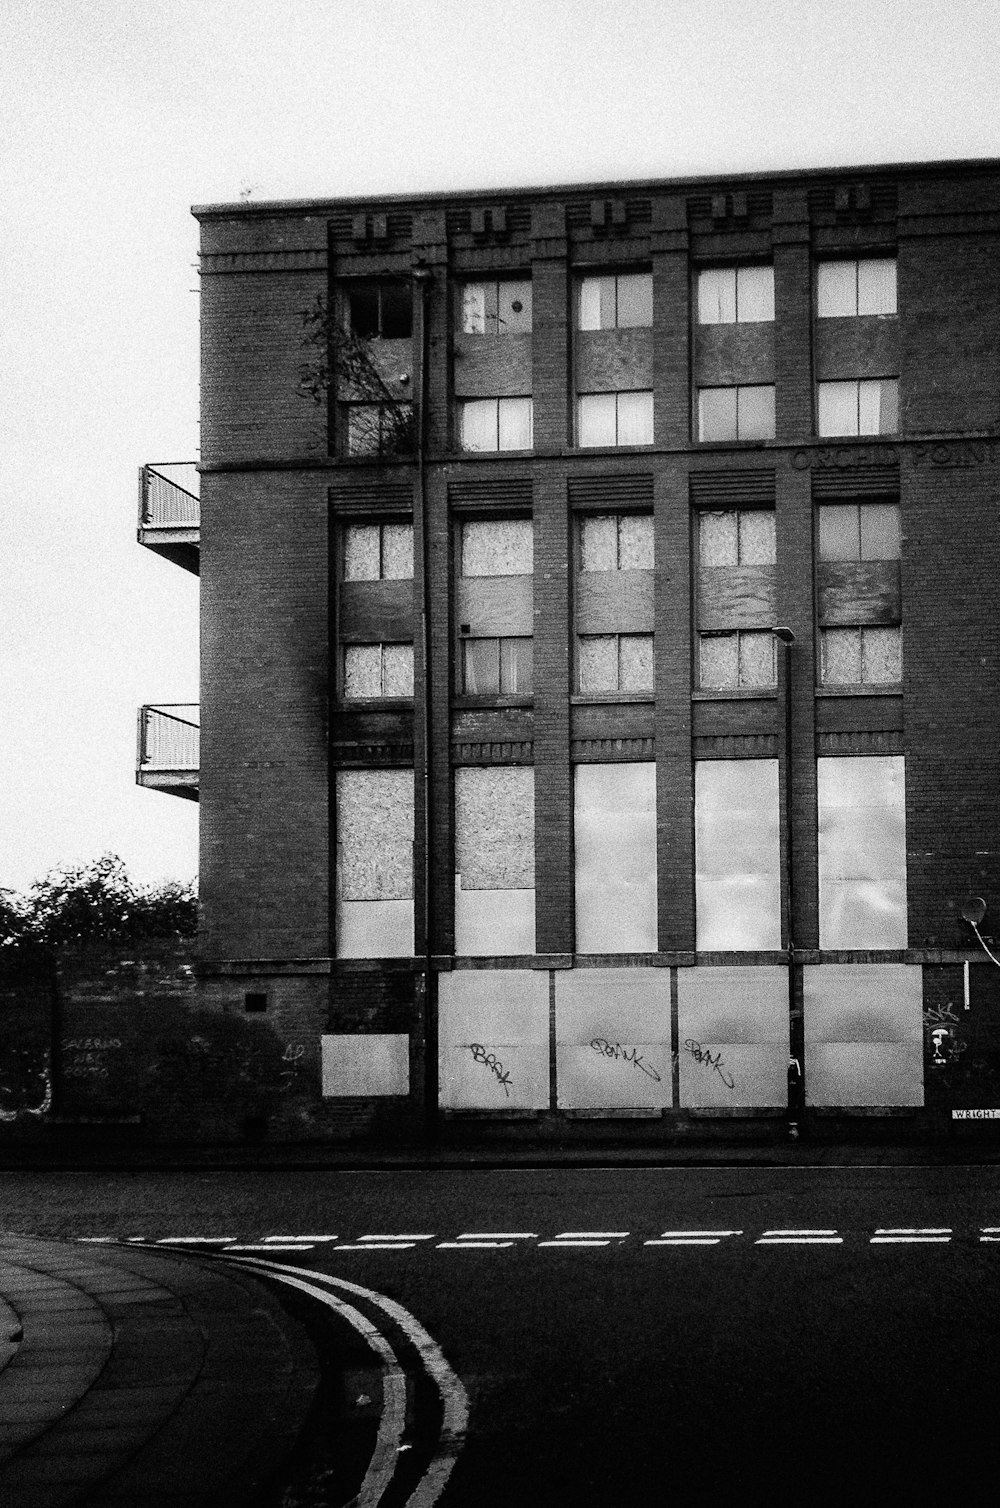 a black and white photo of a building with lots of windows